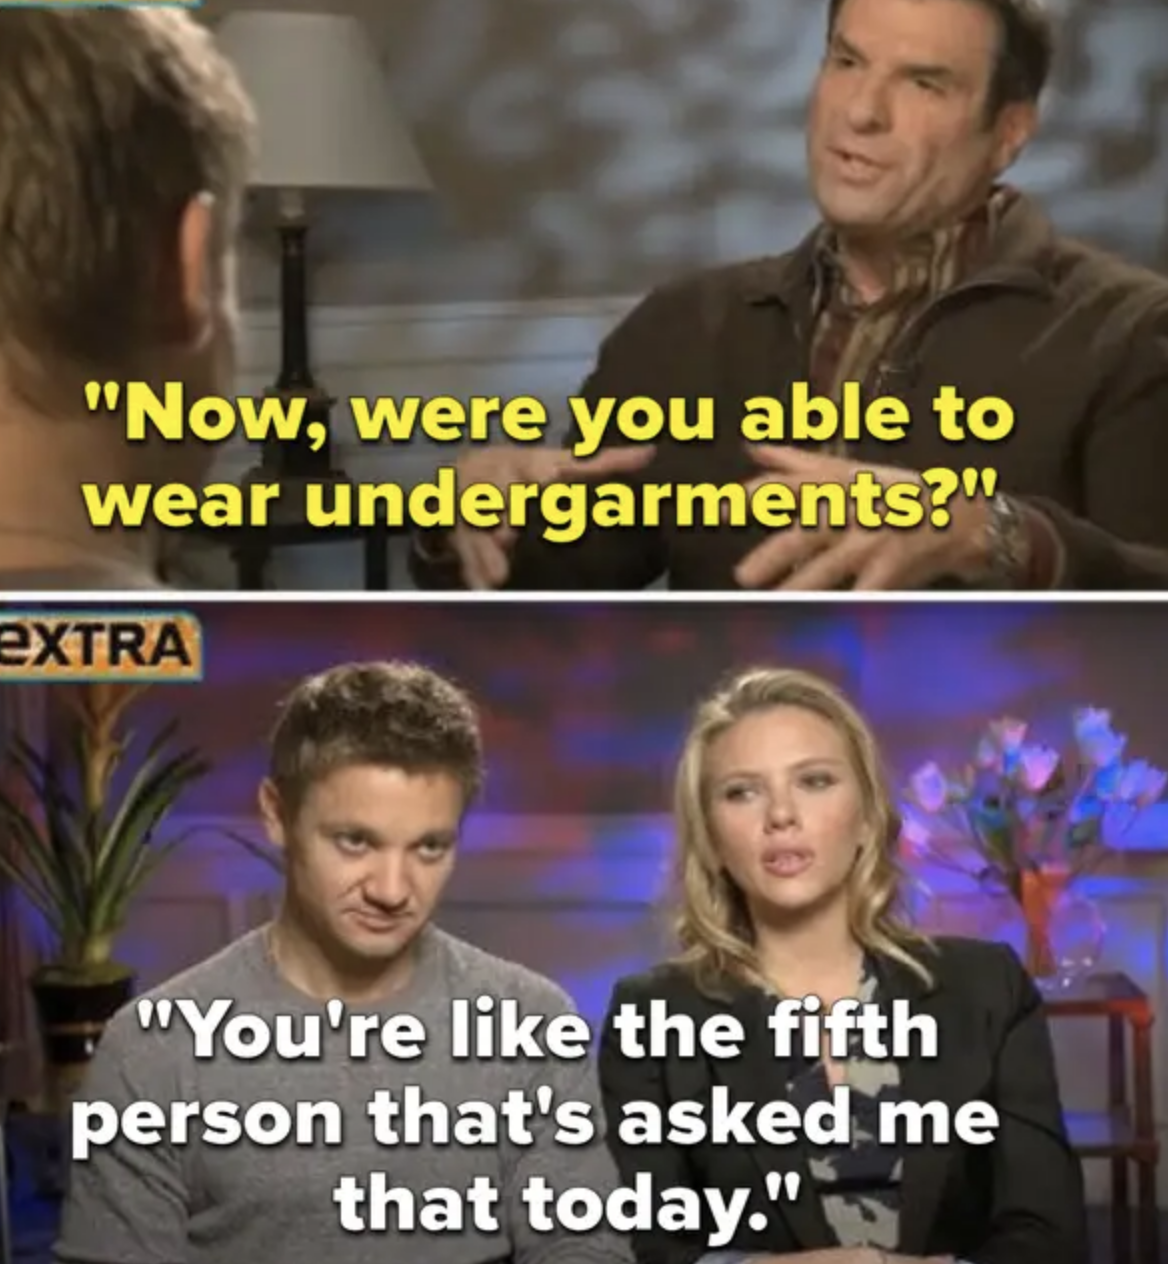 scarlett looking annoyed during the interview